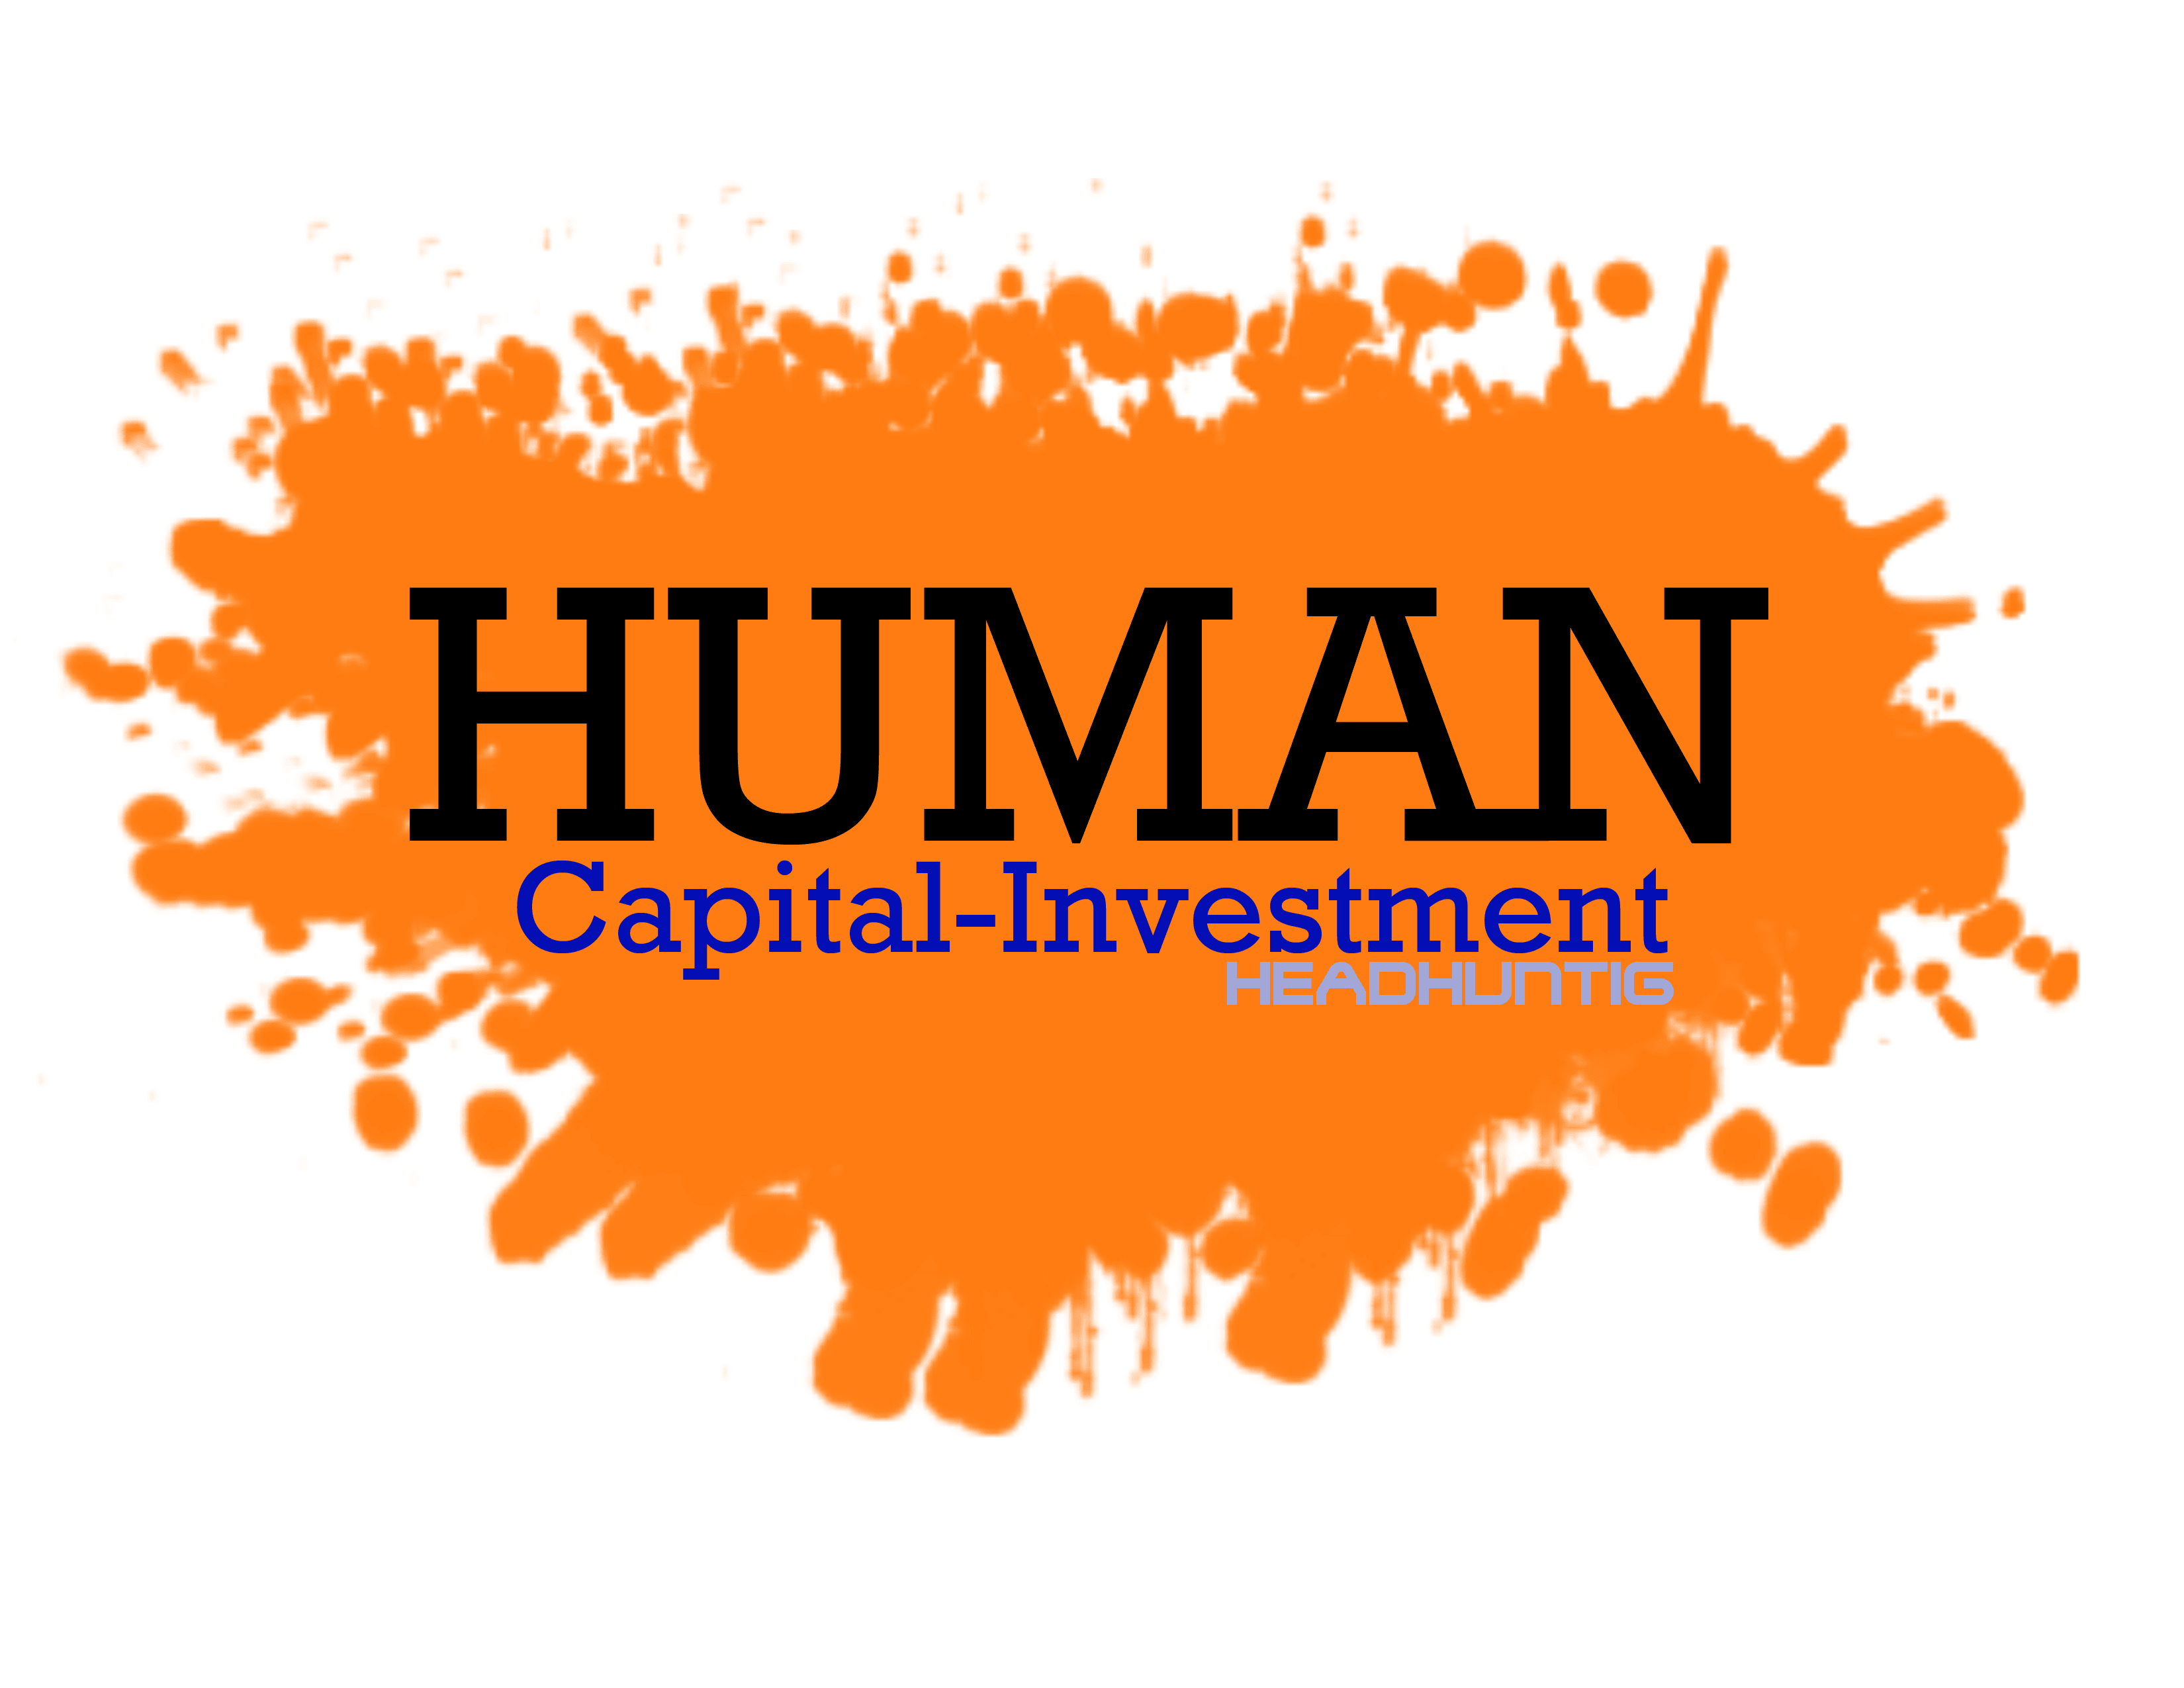 Human Capital-Investment